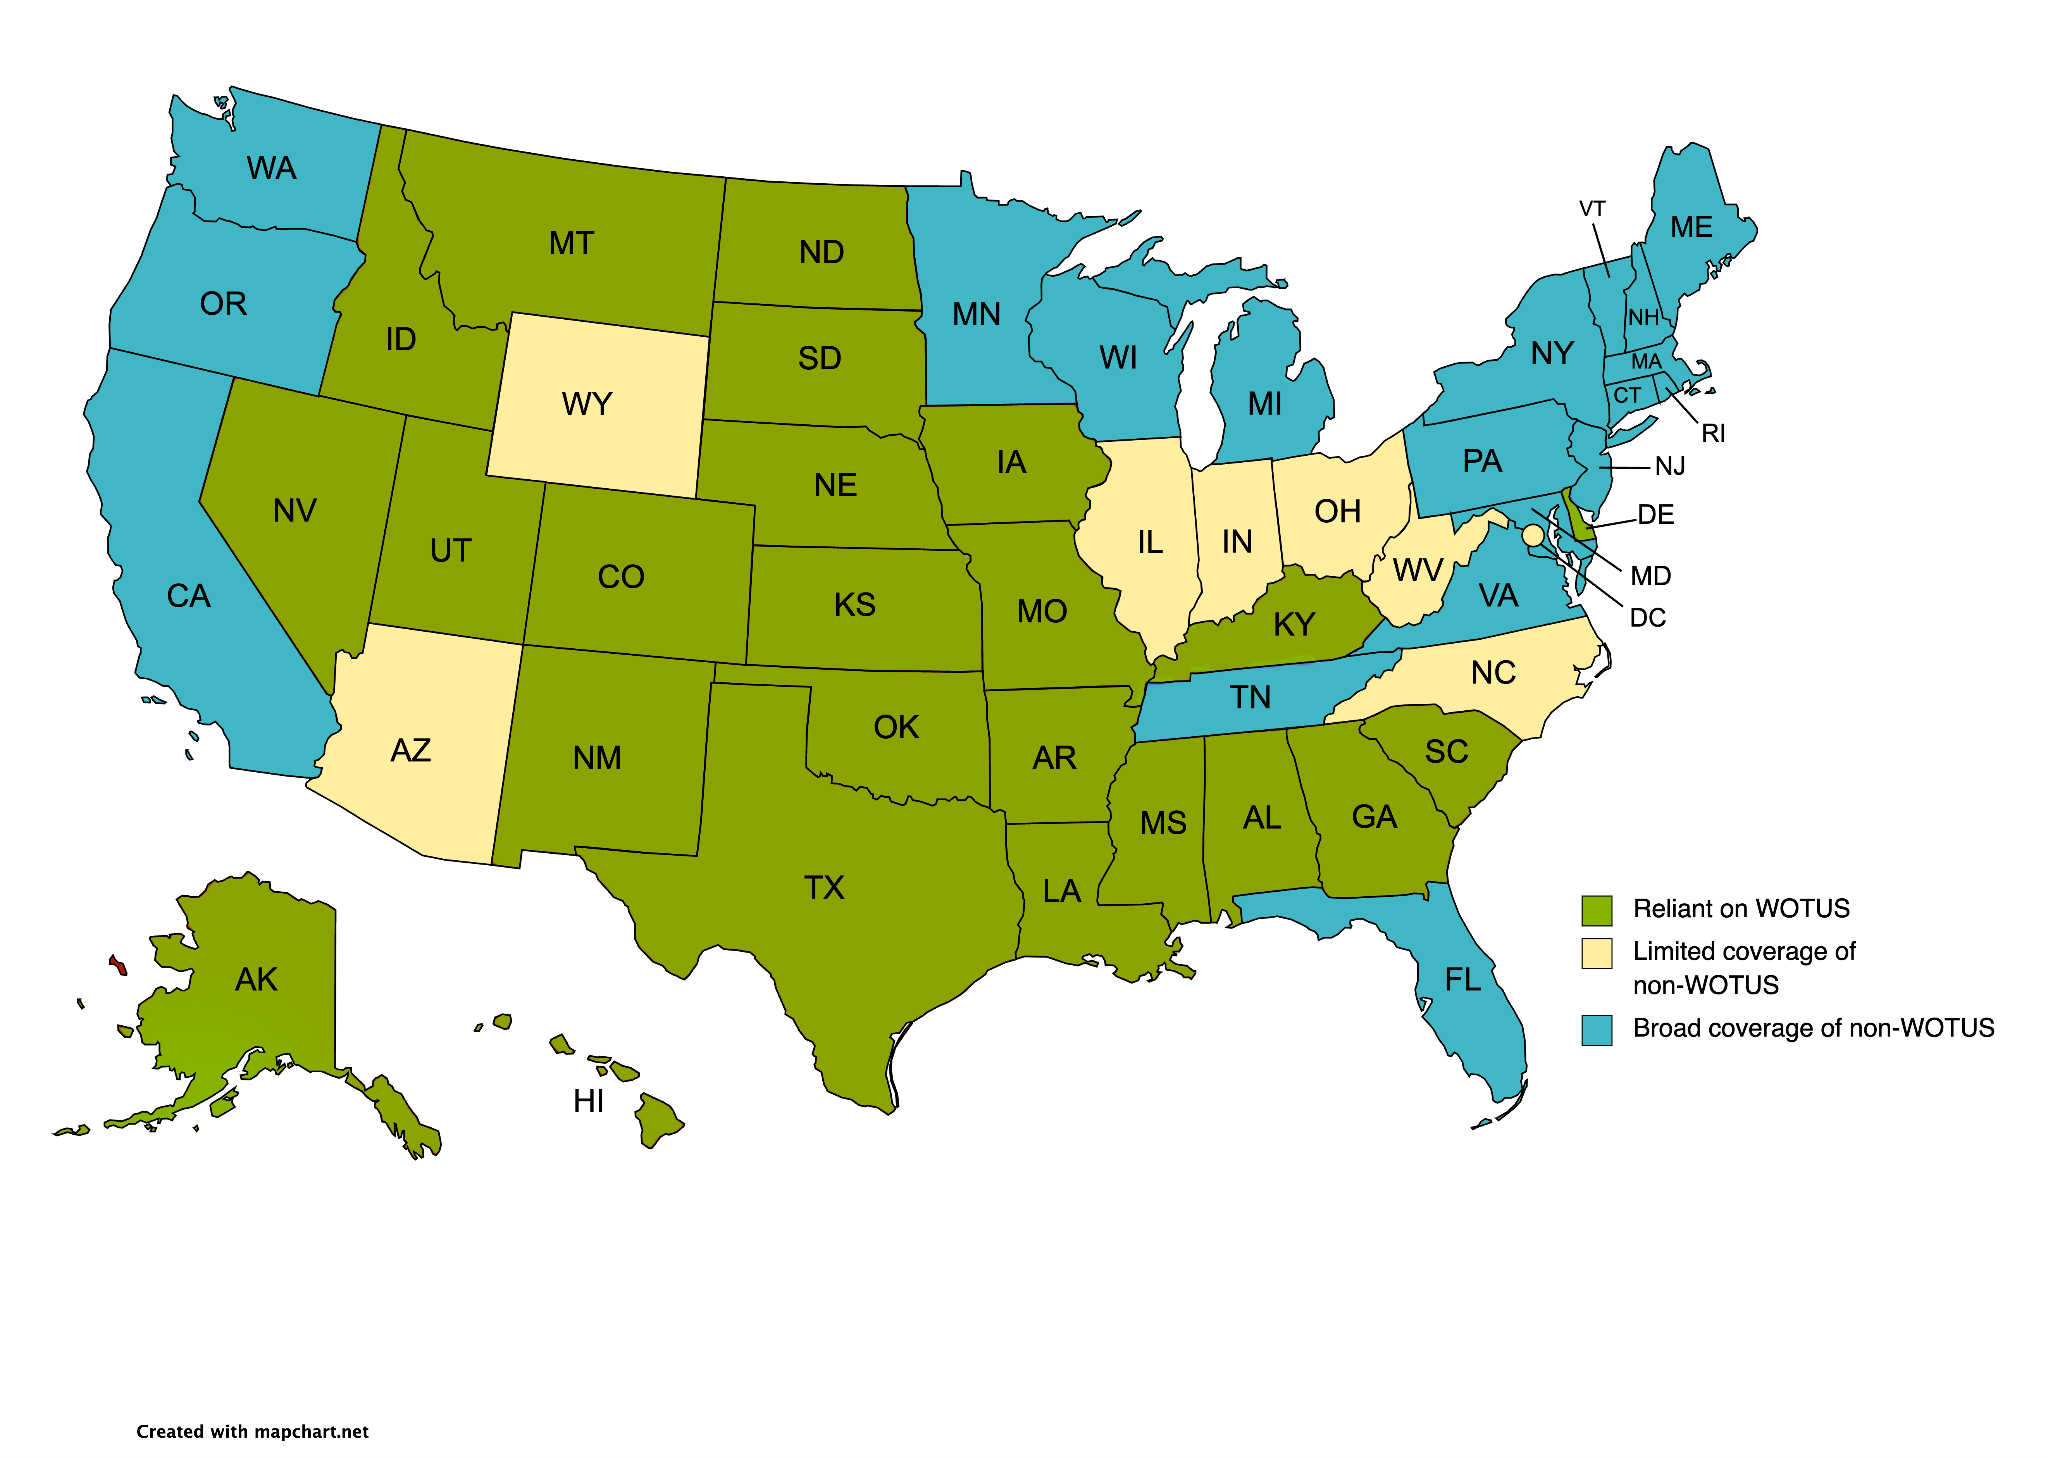 A map of the United States depicting which states are reliant on WOTUS, and which are not.